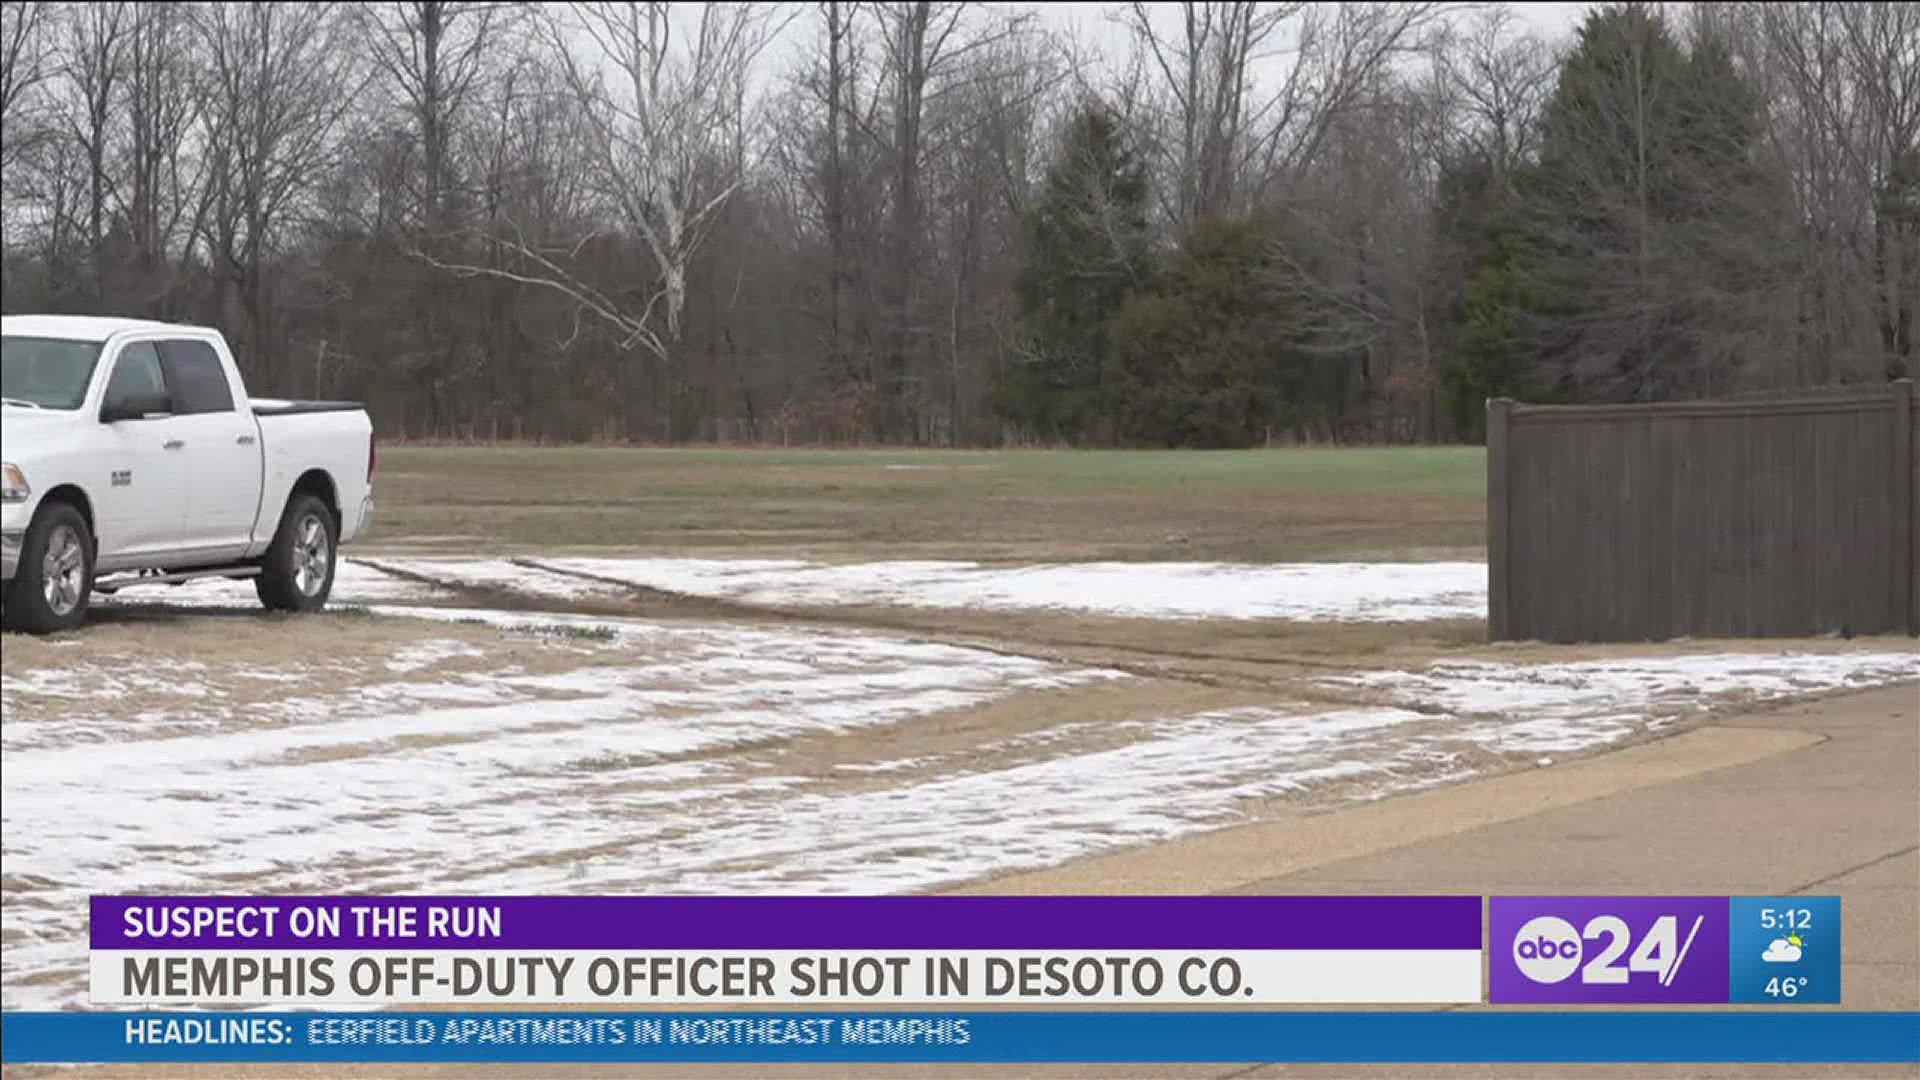 The Desoto County Sheriff's Department said the Memphis Police officer was off-duty when he was shot at his home in the Miller Farms area Monday morning.